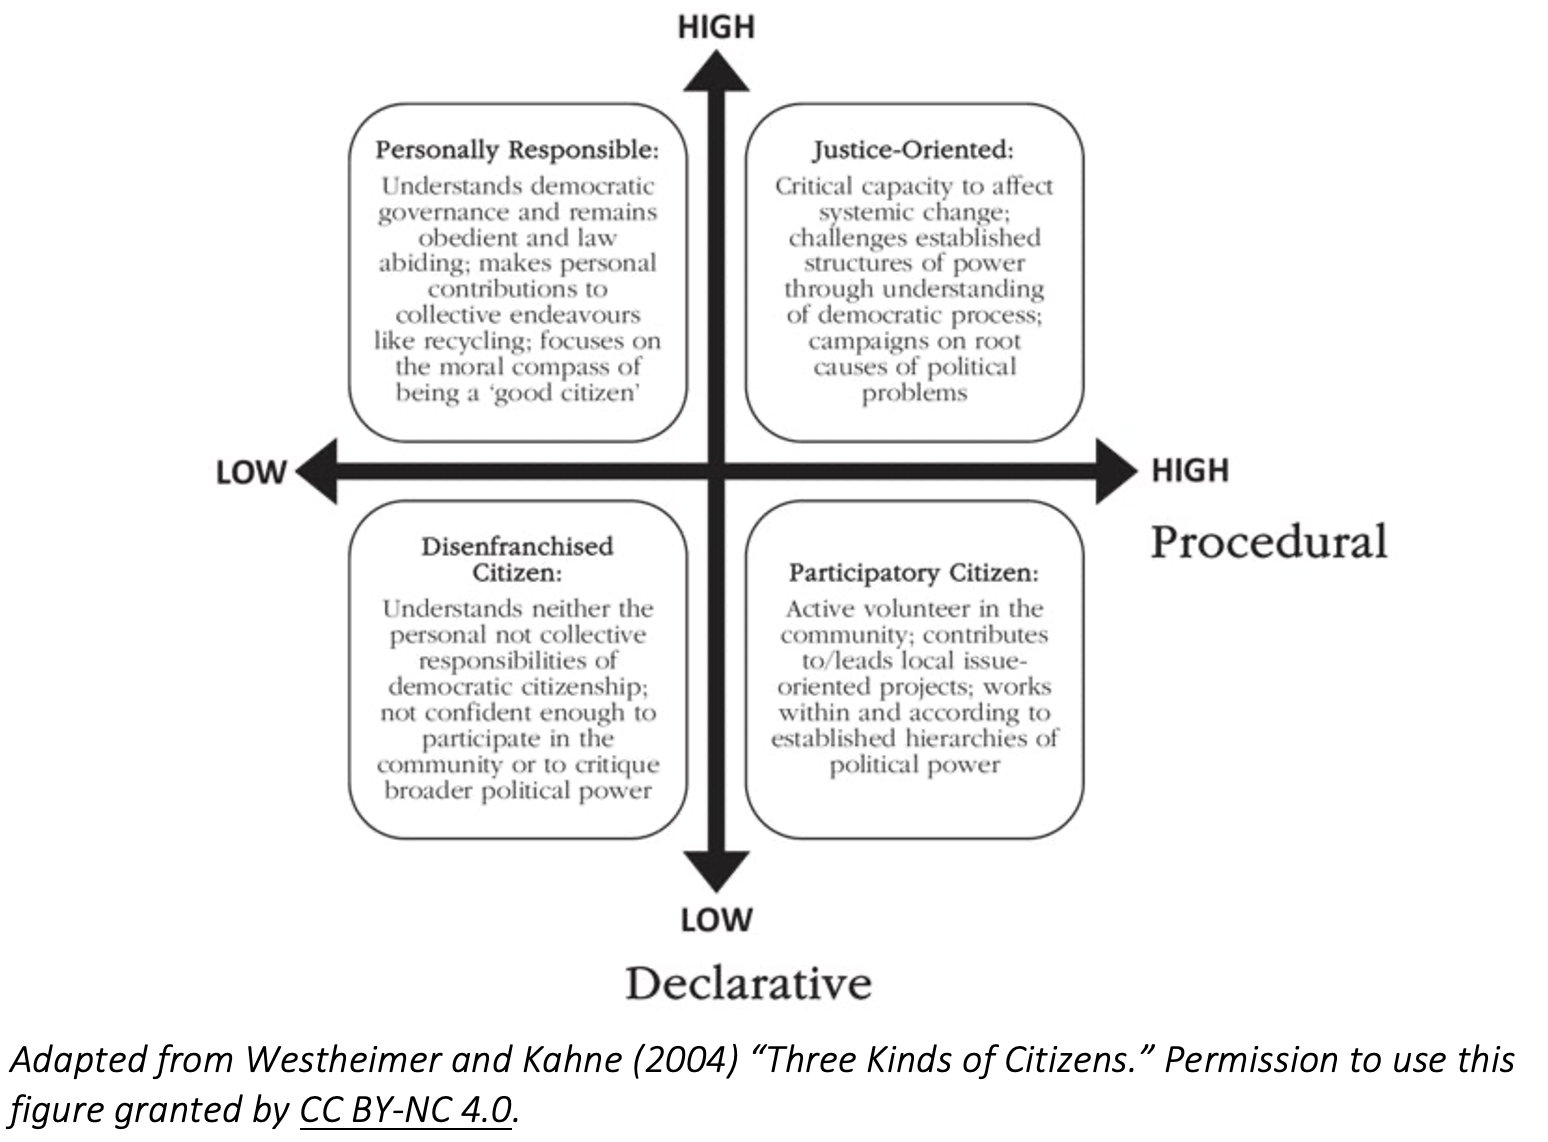  This image is a graph which depicts the Declarative-Procedural Paradigm. The graph's x-axis is procedural (low to high). The y-axis is declarative (low to high). The upper left quadrant is the personally responsible citizen. The upper right quadrant is the justice-oriented citizen. The lower right quadrant is the participatory citizen. The lower left quadrant is disenfranchised citizen.